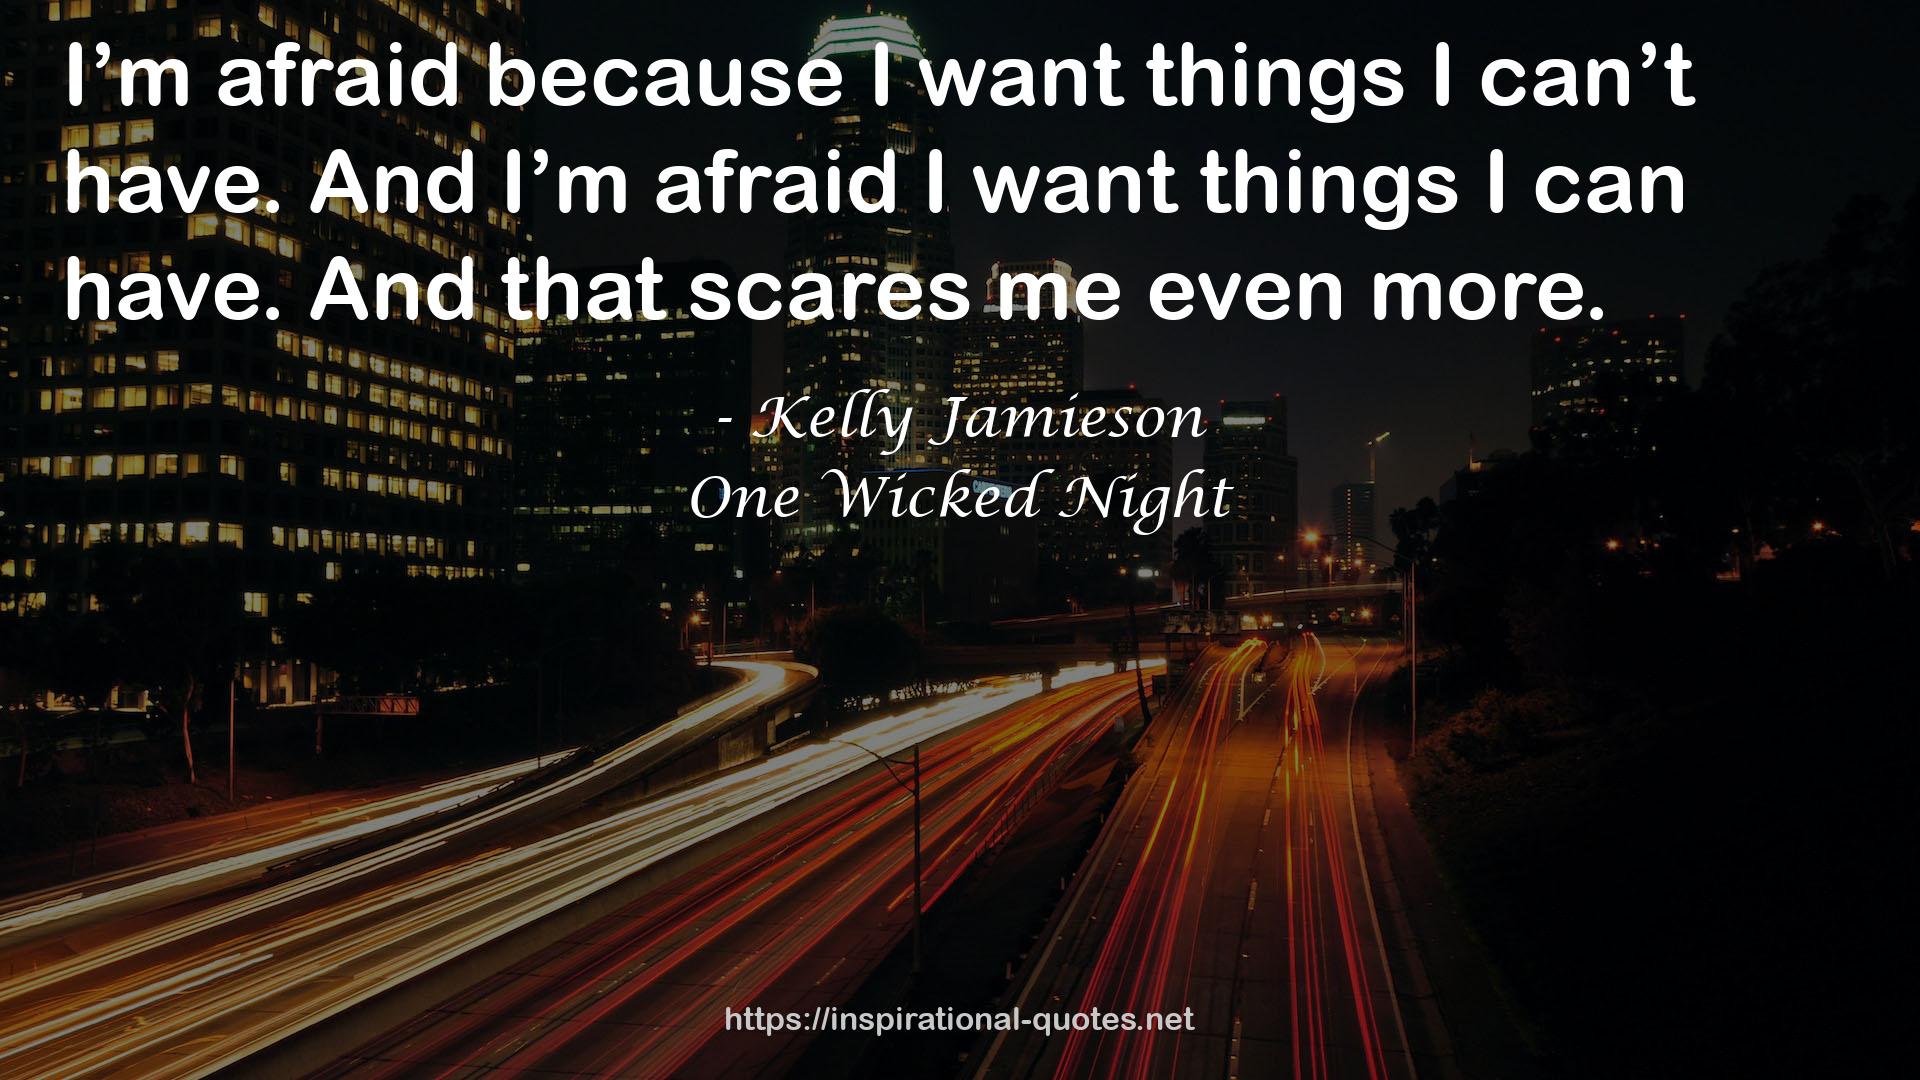 One Wicked Night QUOTES